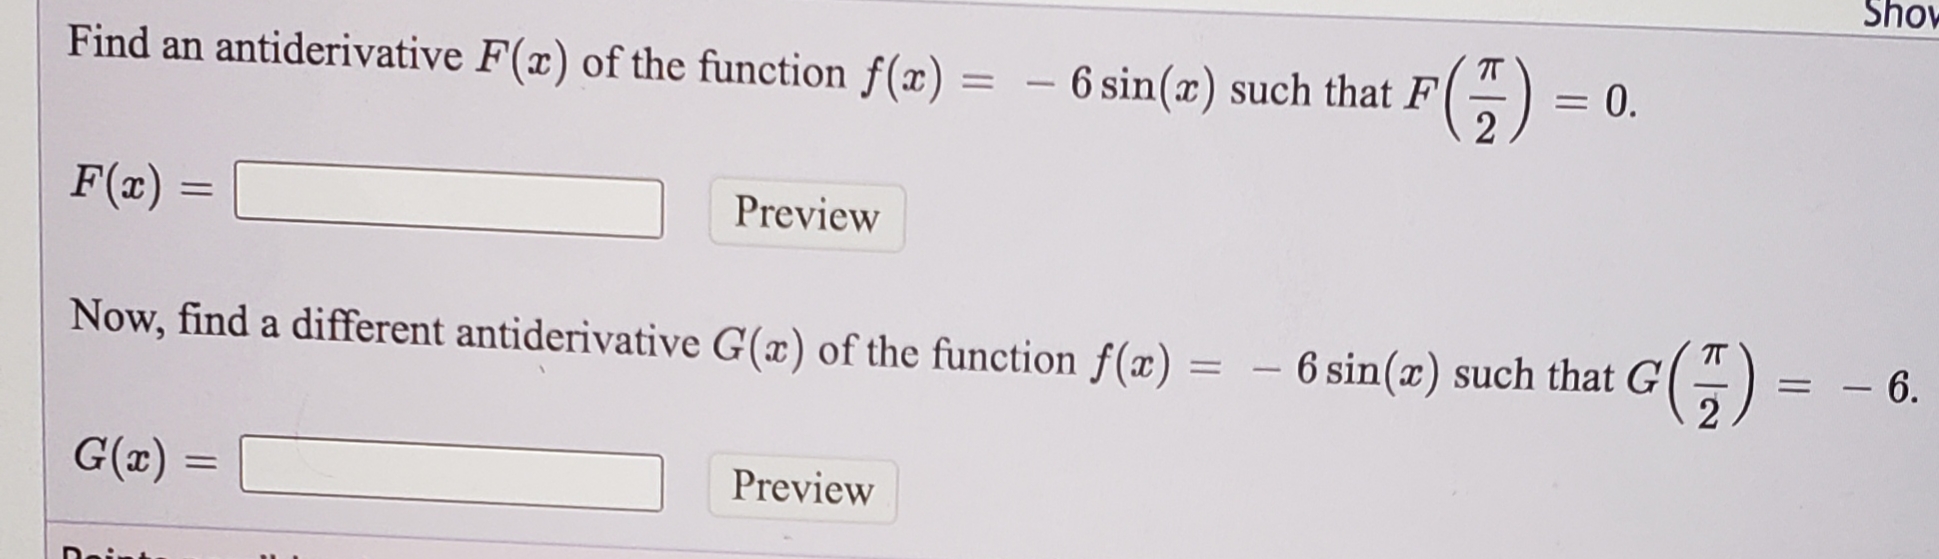 Sho
Find an antiderivative F(x) of the function f(x)
6 sin(x) such that F(=)
%3D
= 0.
|
F(x) =
Preview
Now, find a different antiderivative G(x) of the function f(x) = - 6 sin(a) such that G'
G()=
|
•9
G(x) =
Preview
